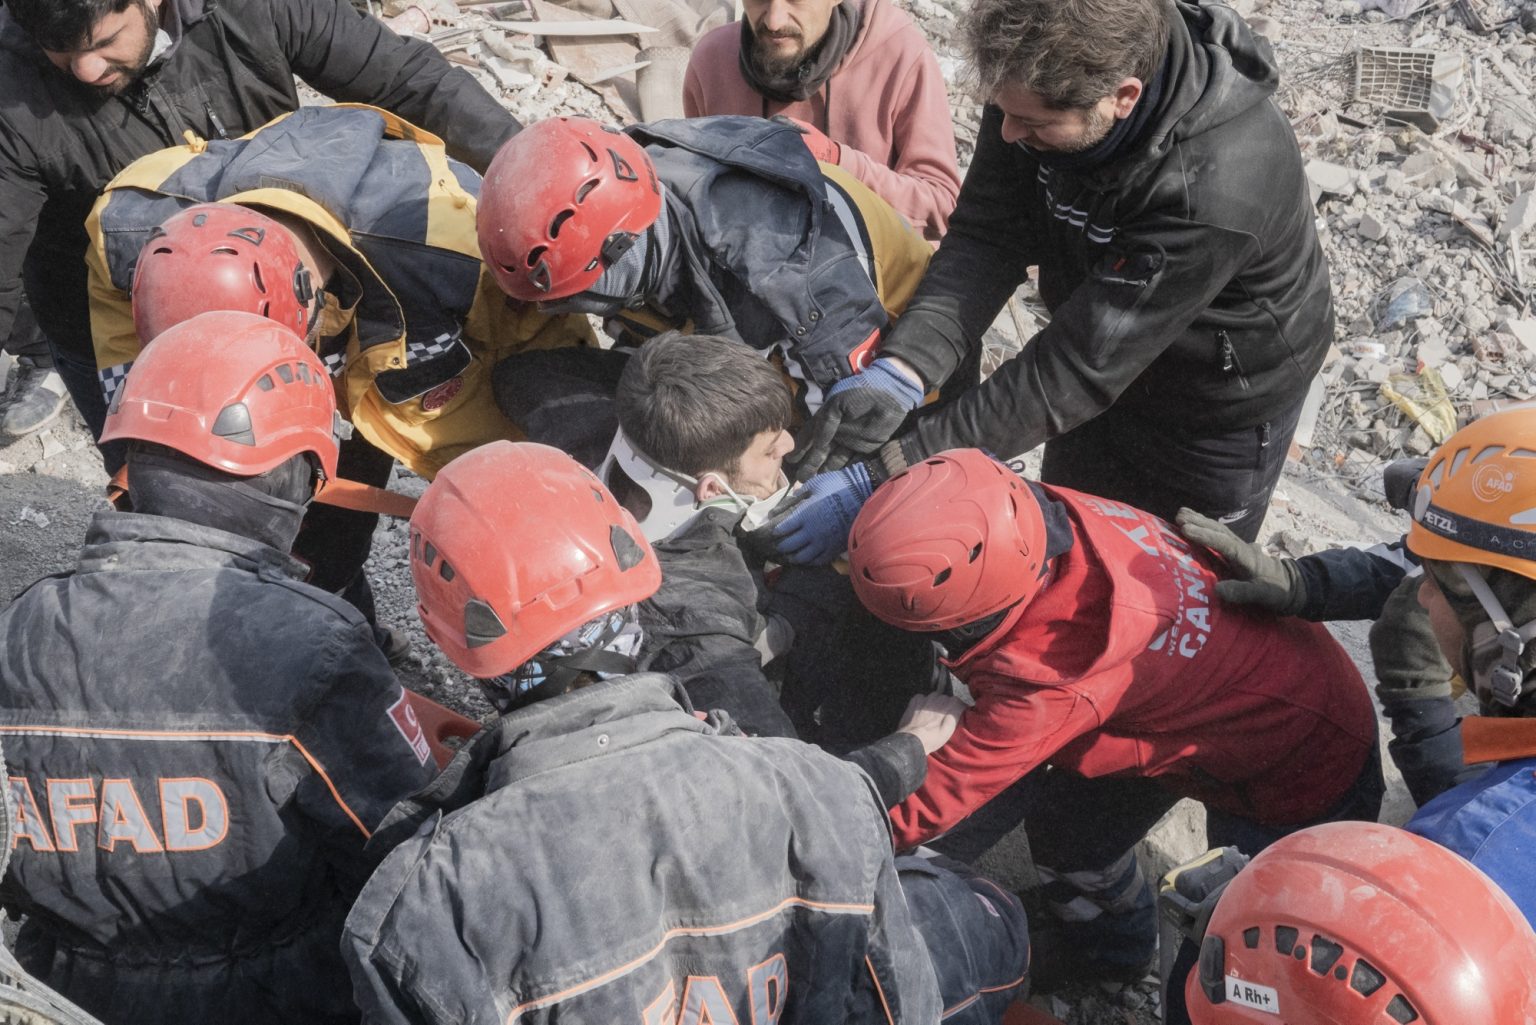 Kahramanmaras¸, Turkey, February 2023 - The aftermath of the earthquake that hit southern Turkey and northern Syria.     Ibrahim Kantarci, 29, is pulled out still alive under the rubble of a collapsed building. ><
Kahramanmaras¸, Turchia, febbraio 2023  Le conseguenze del terremoto che ha colpito la Turchia del Sud e la Siria del nord.